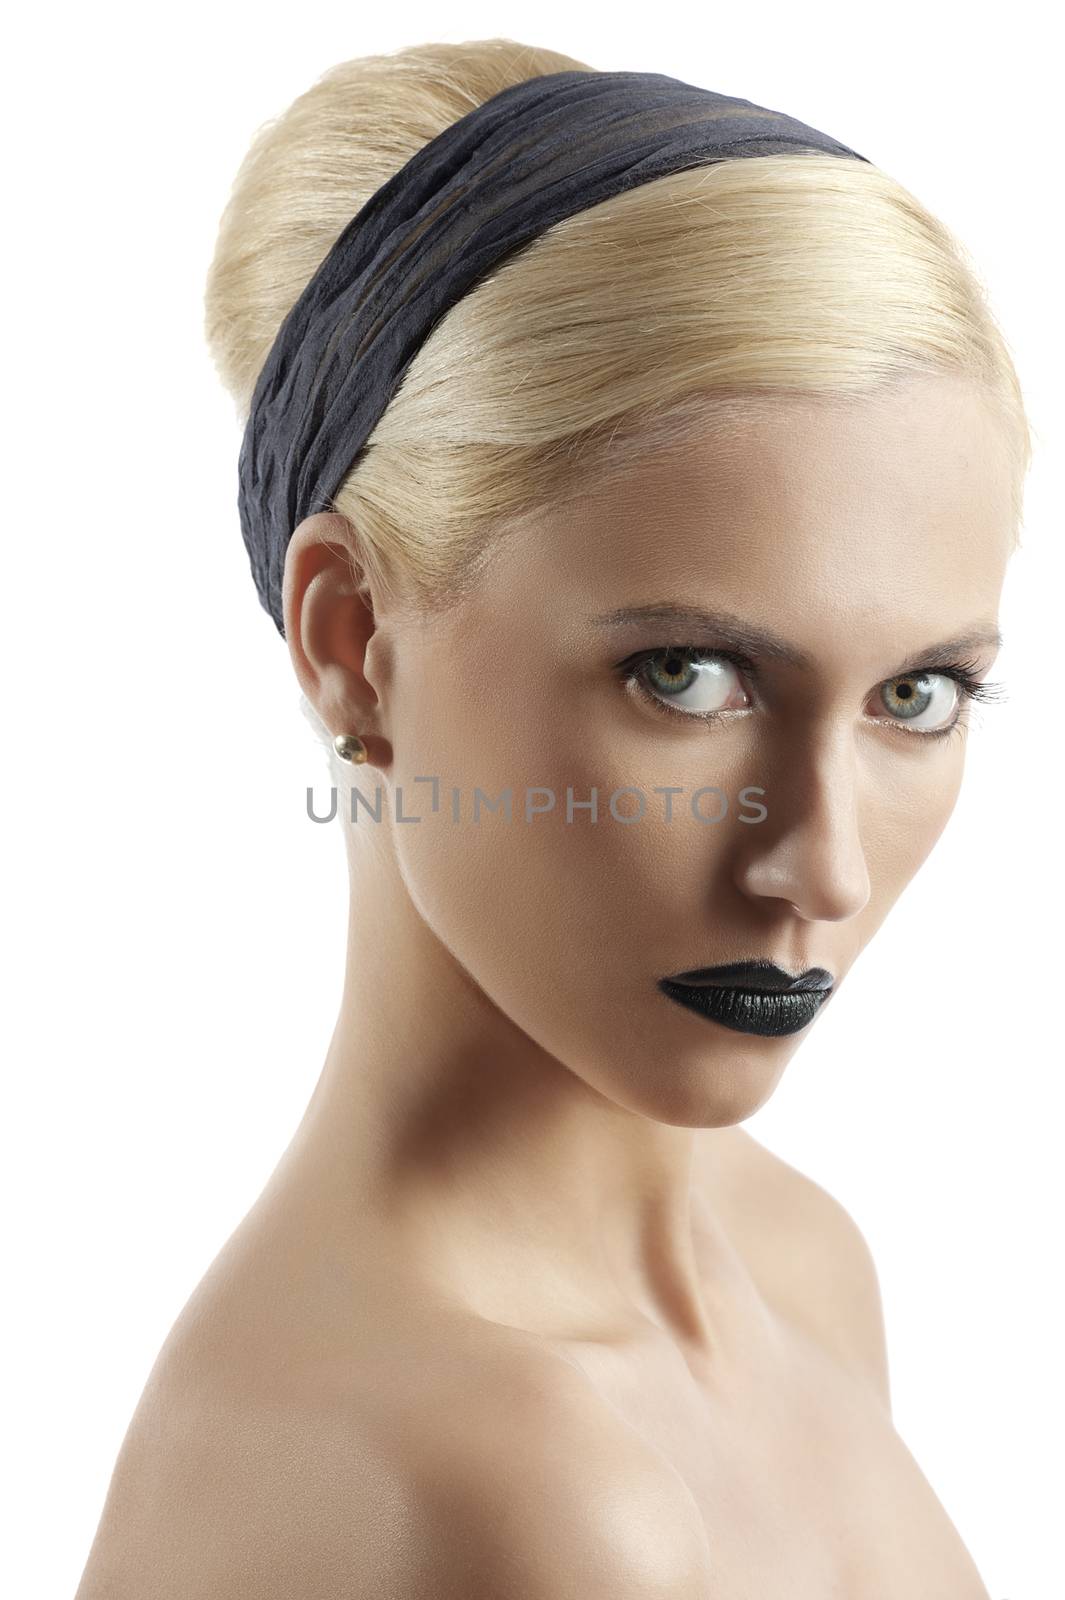 fashion portrait of young blond woman with hair style black lips looking at the camera against white background